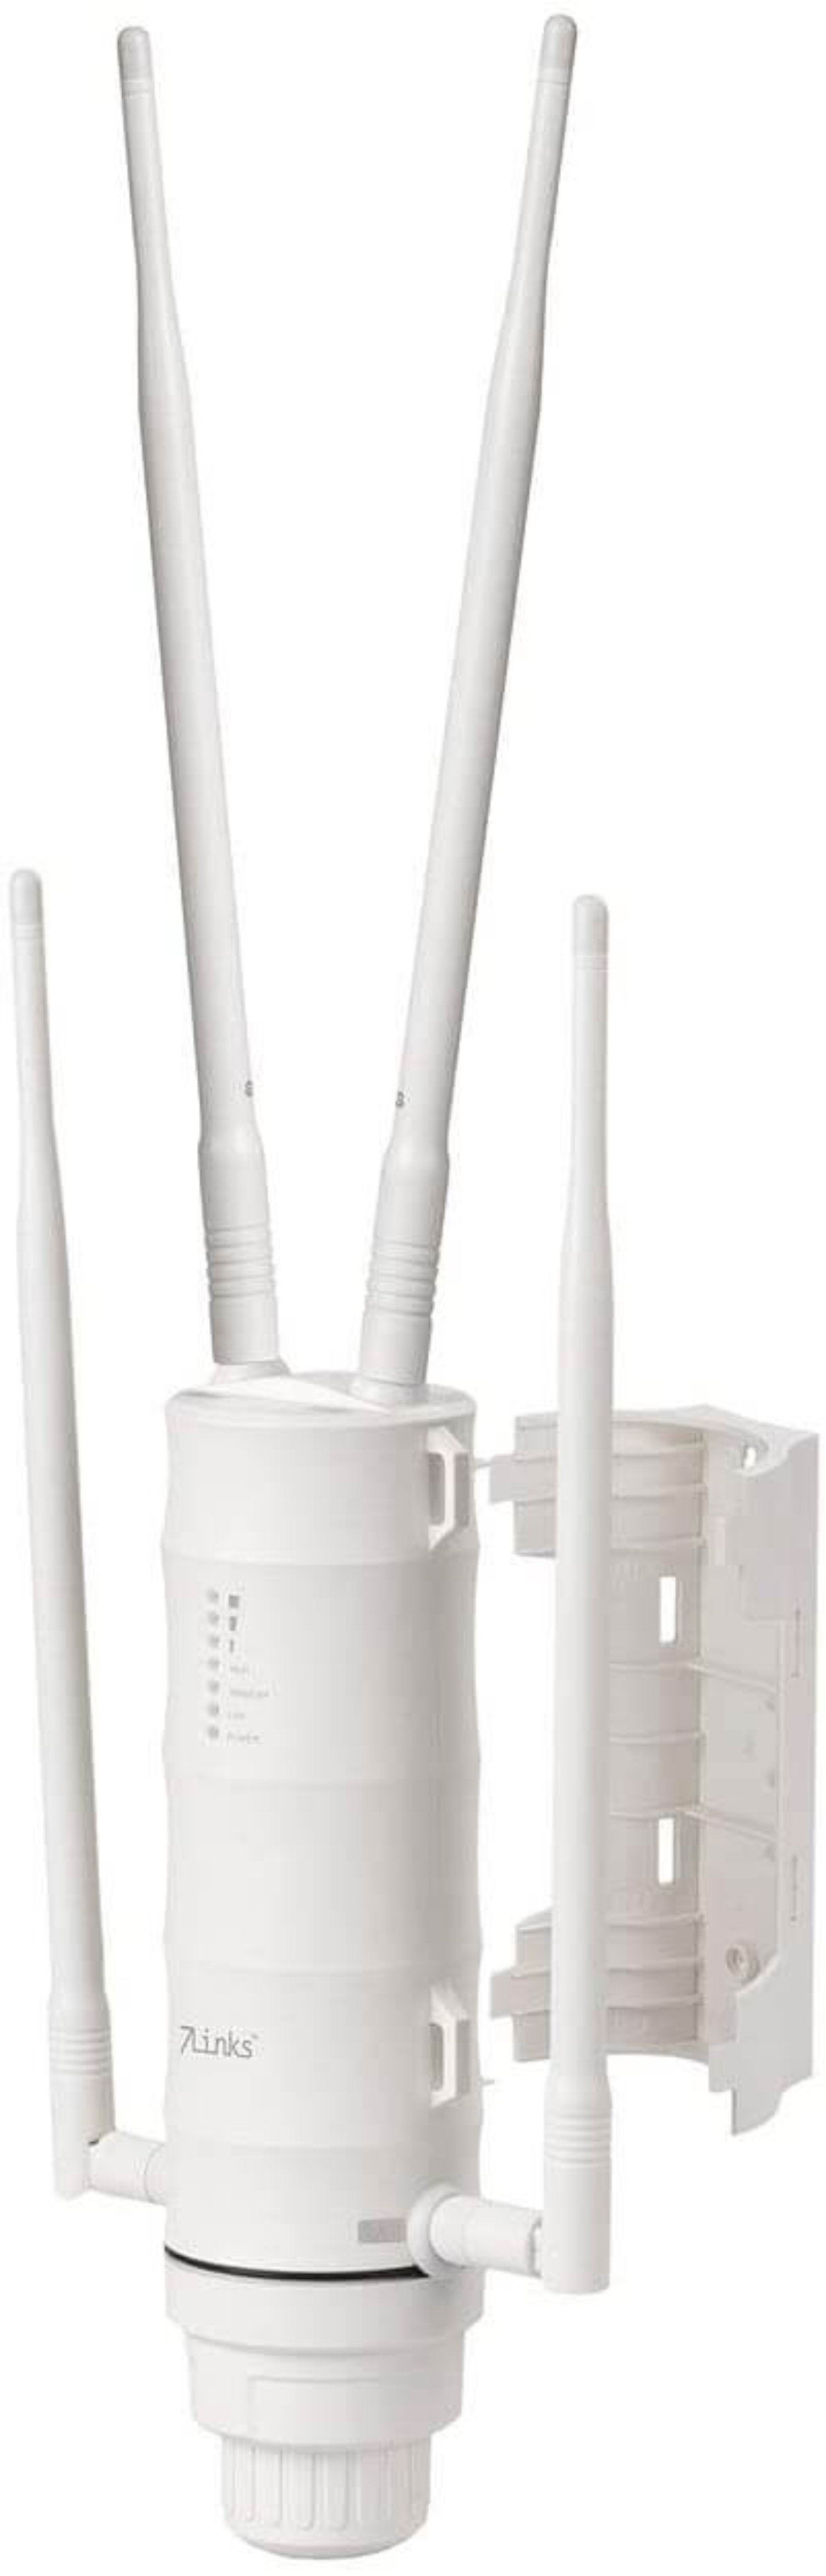 7LINKS Outdoor WLAN-Repeater